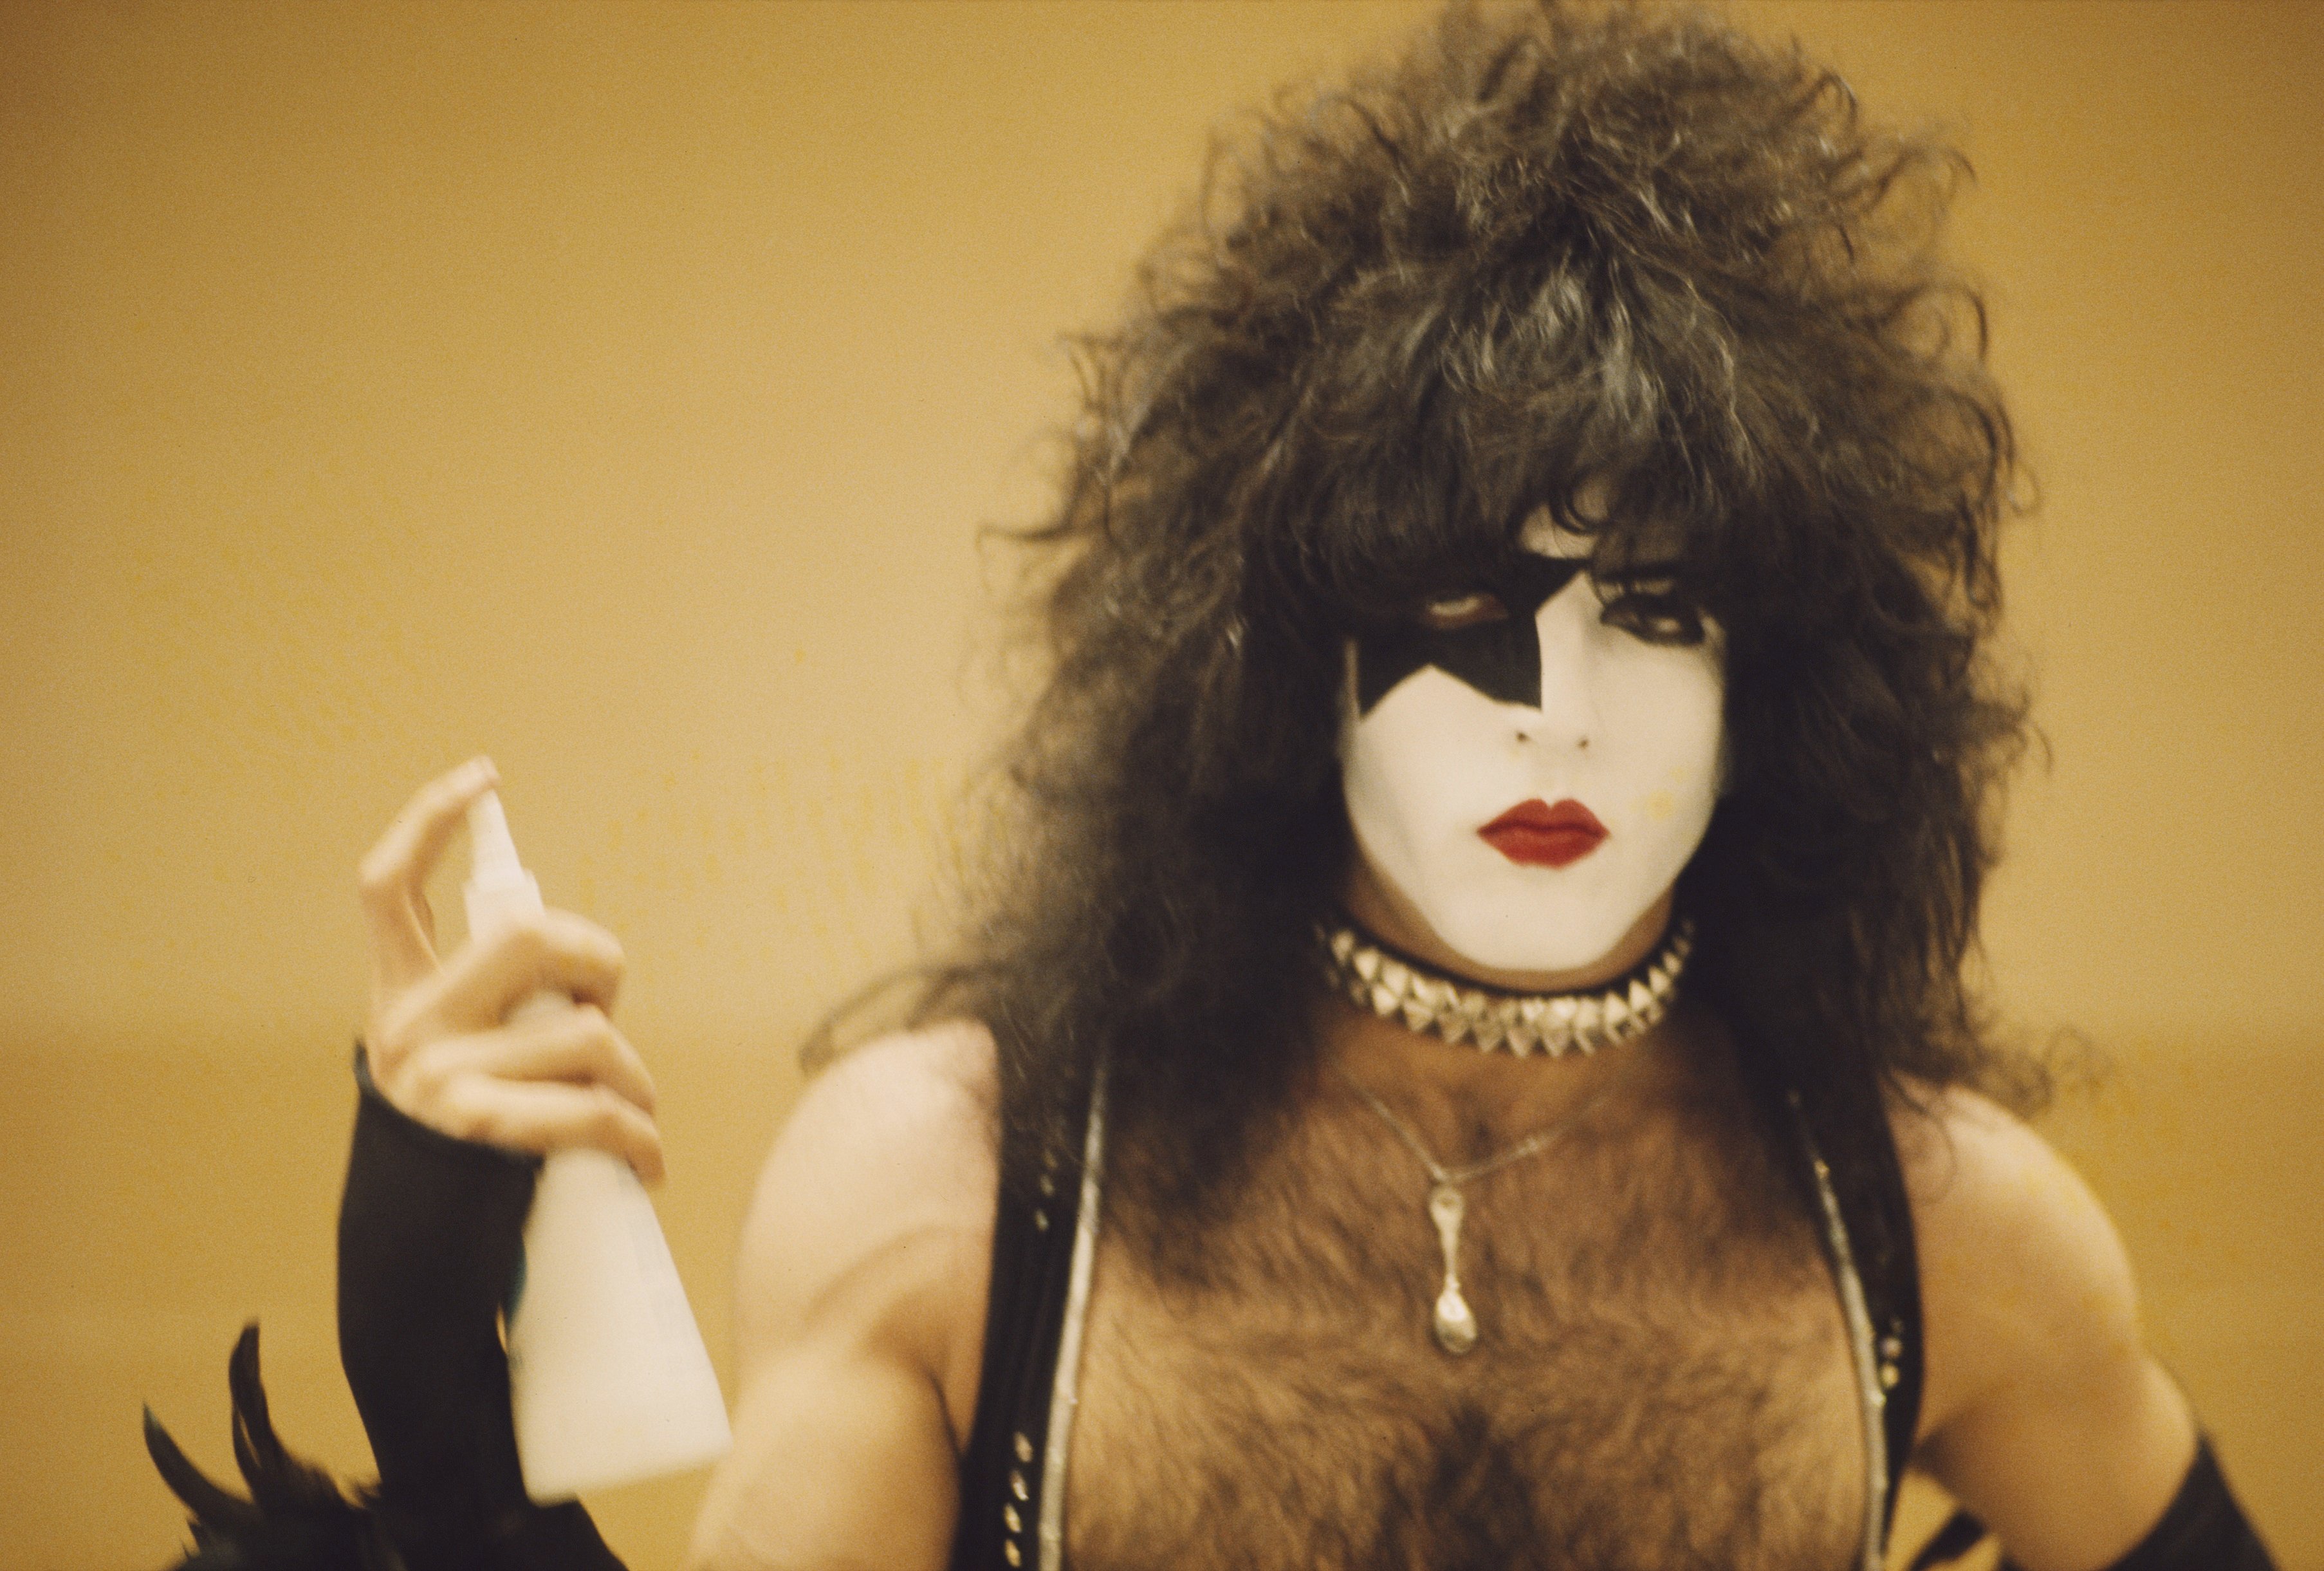 Paul Stanley of Kiss wearing his iconic makeup